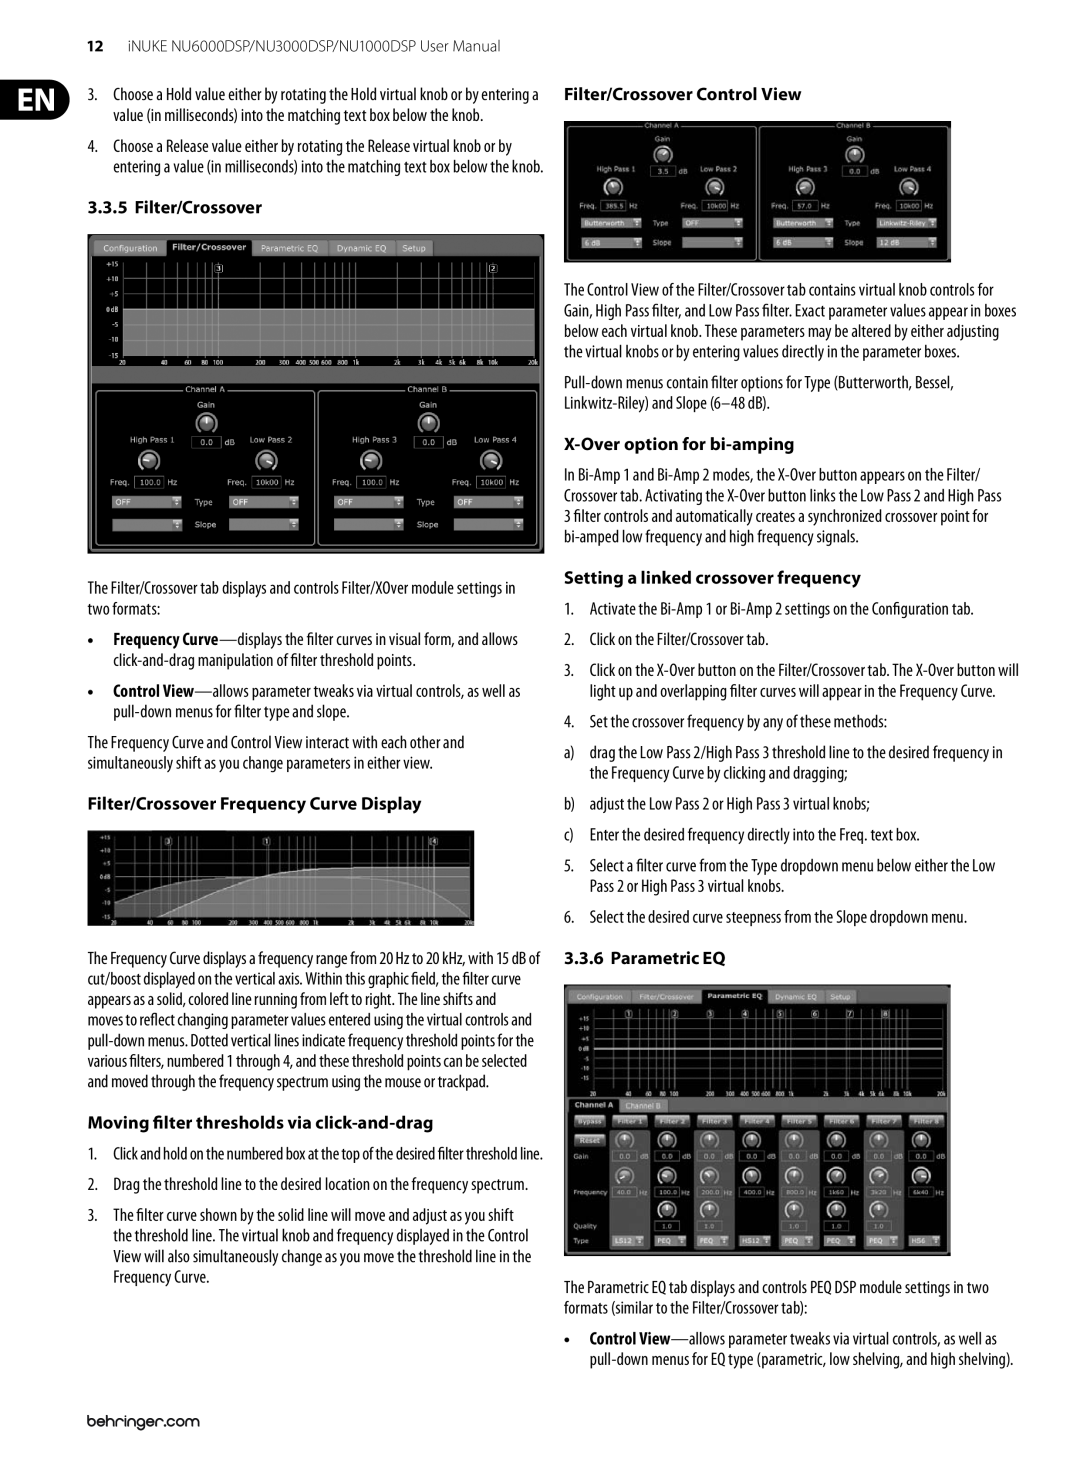 Behringer NU6000DSP, NU3000DSP Filter/Crossover Frequency Curve Display, Moving filter thresholds via click-and-drag 